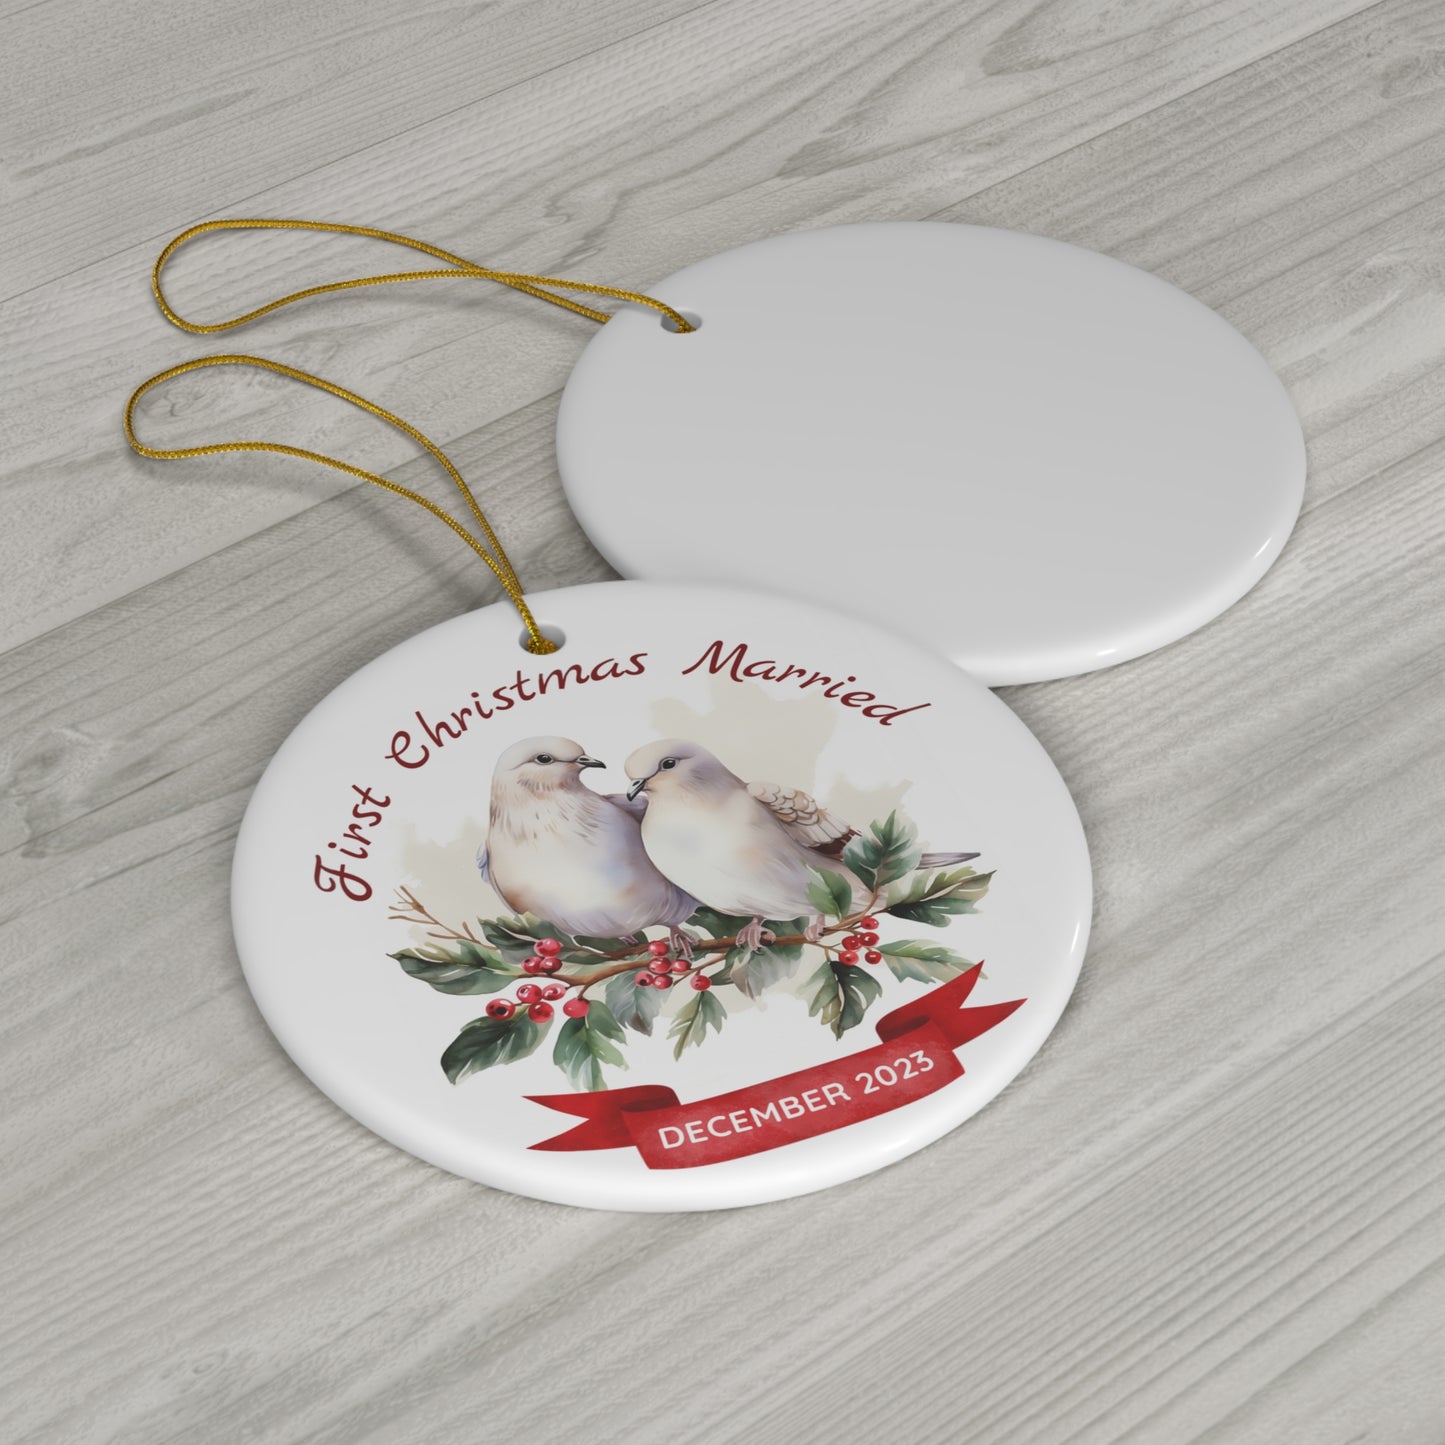 First Christmas Married Ornament, 2023 Keepsake Holiday Ornament, Love Birds - Perfect Gift for Mr. and Mrs. Newlywed